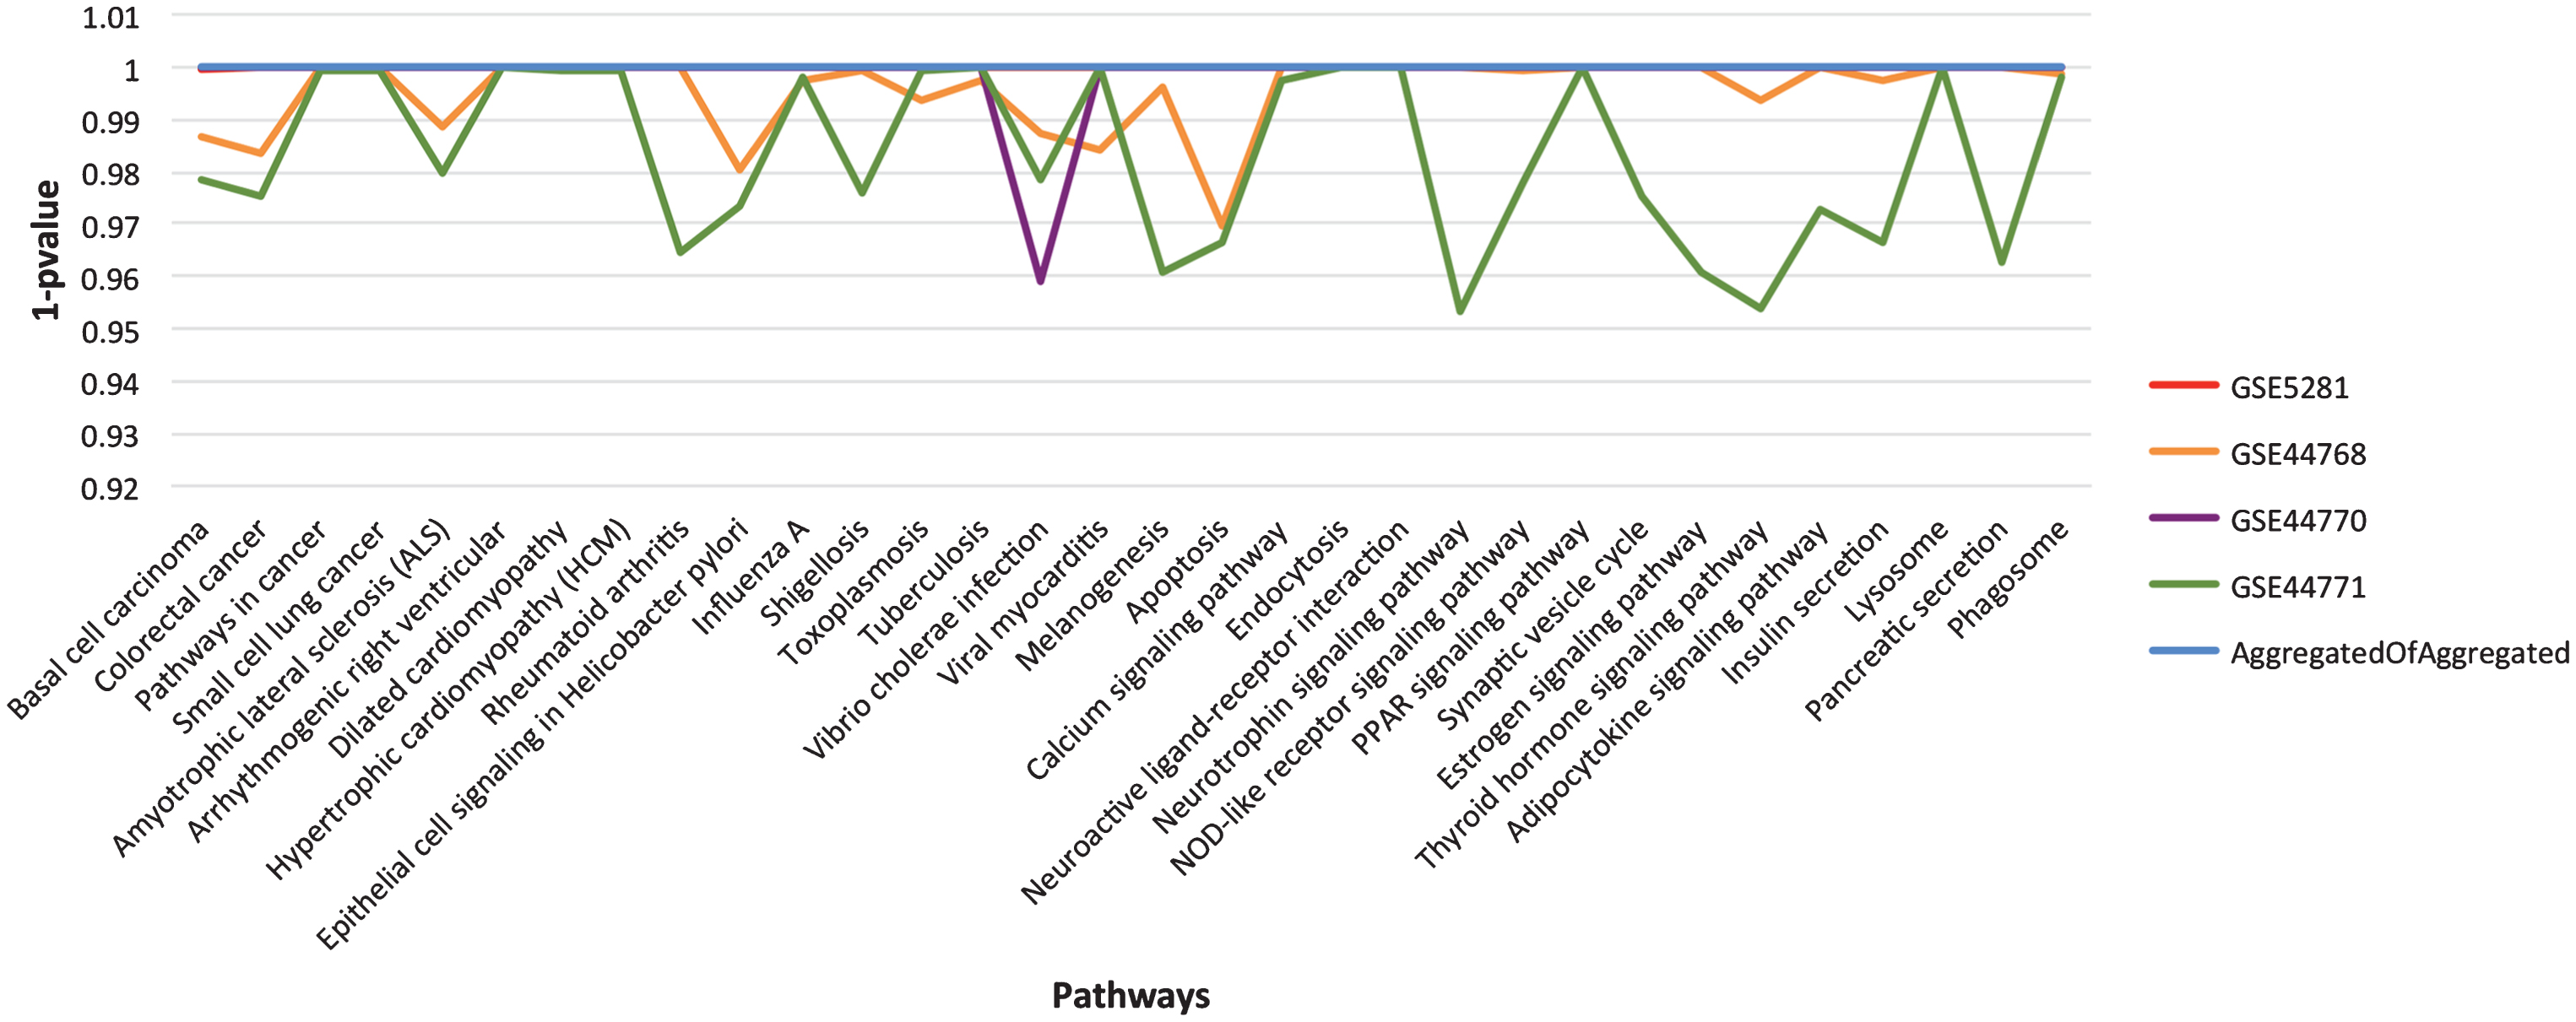 The landscape of p-value for the final list of significant pathways. For easy visualization, we have used 1-p value instead of p-value on Y-axis. Each line in the graph represents aggregated GRN for specified dataset (see chart legend). The listed pathways show higher significance level in consensus GRN in comparison to the individual dataset aggregated GRNs.